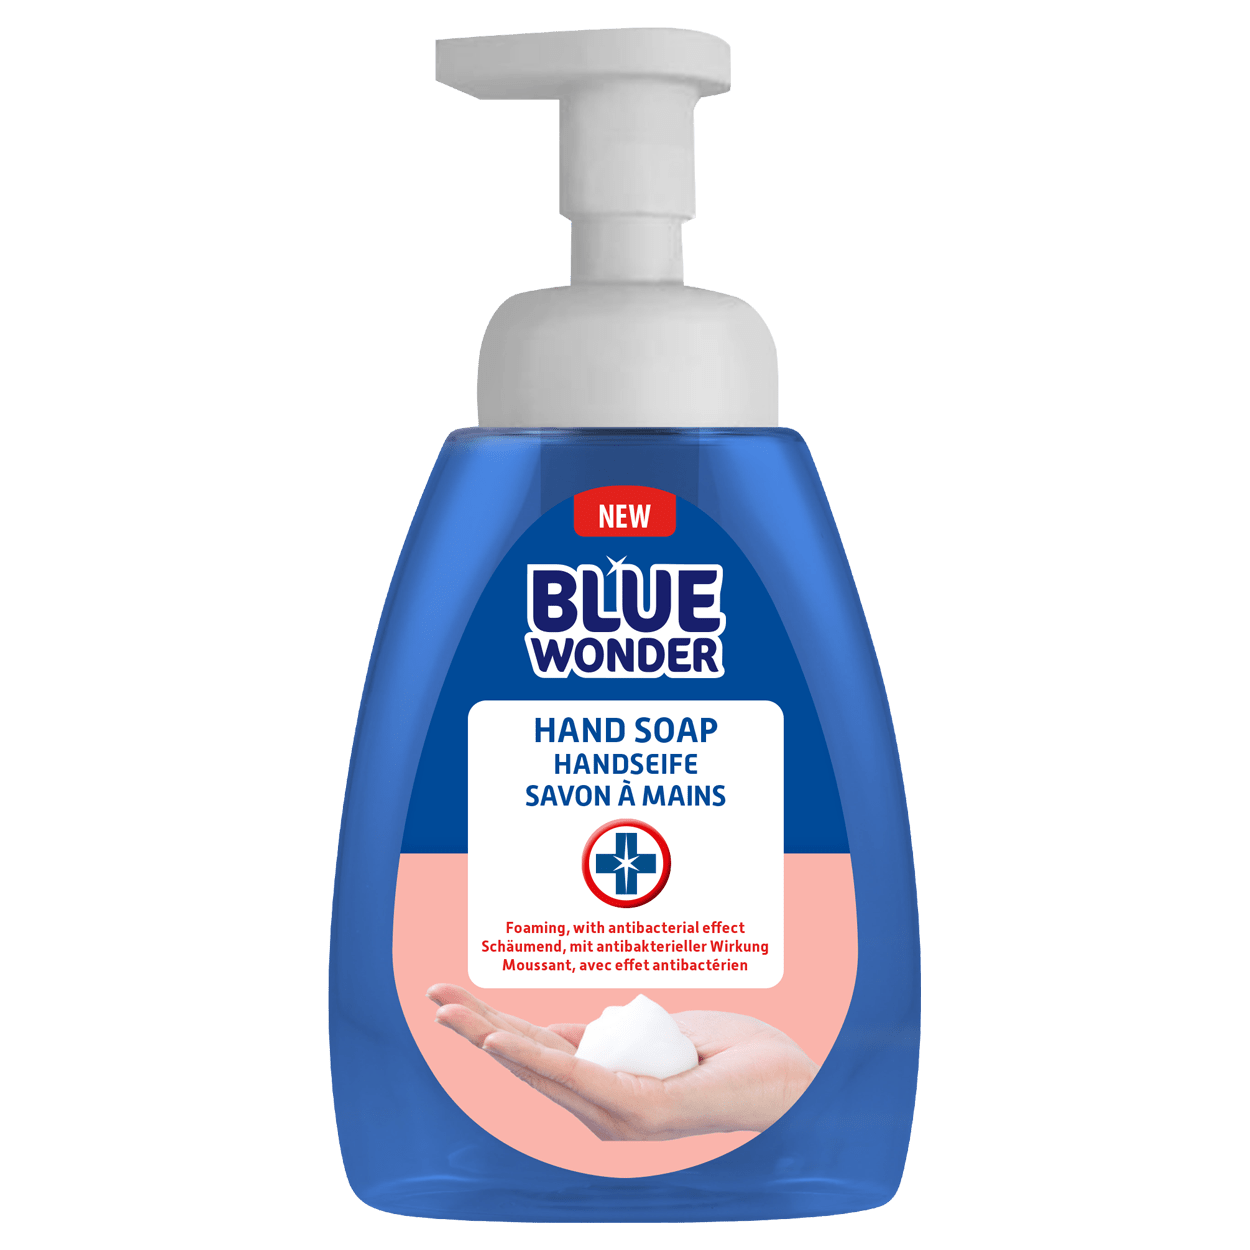 Foaming, with antibacterial effect. Blue Wonder HAND SOAP is a foaming mousse with antibacterial ingredients and is easy to distribute over the hands. That is why Blue Wonder Hand Soap is perfect for good hand hygiene. Blue Wonder Hand Soap has been dermatologically tested and is gentle on the skin.